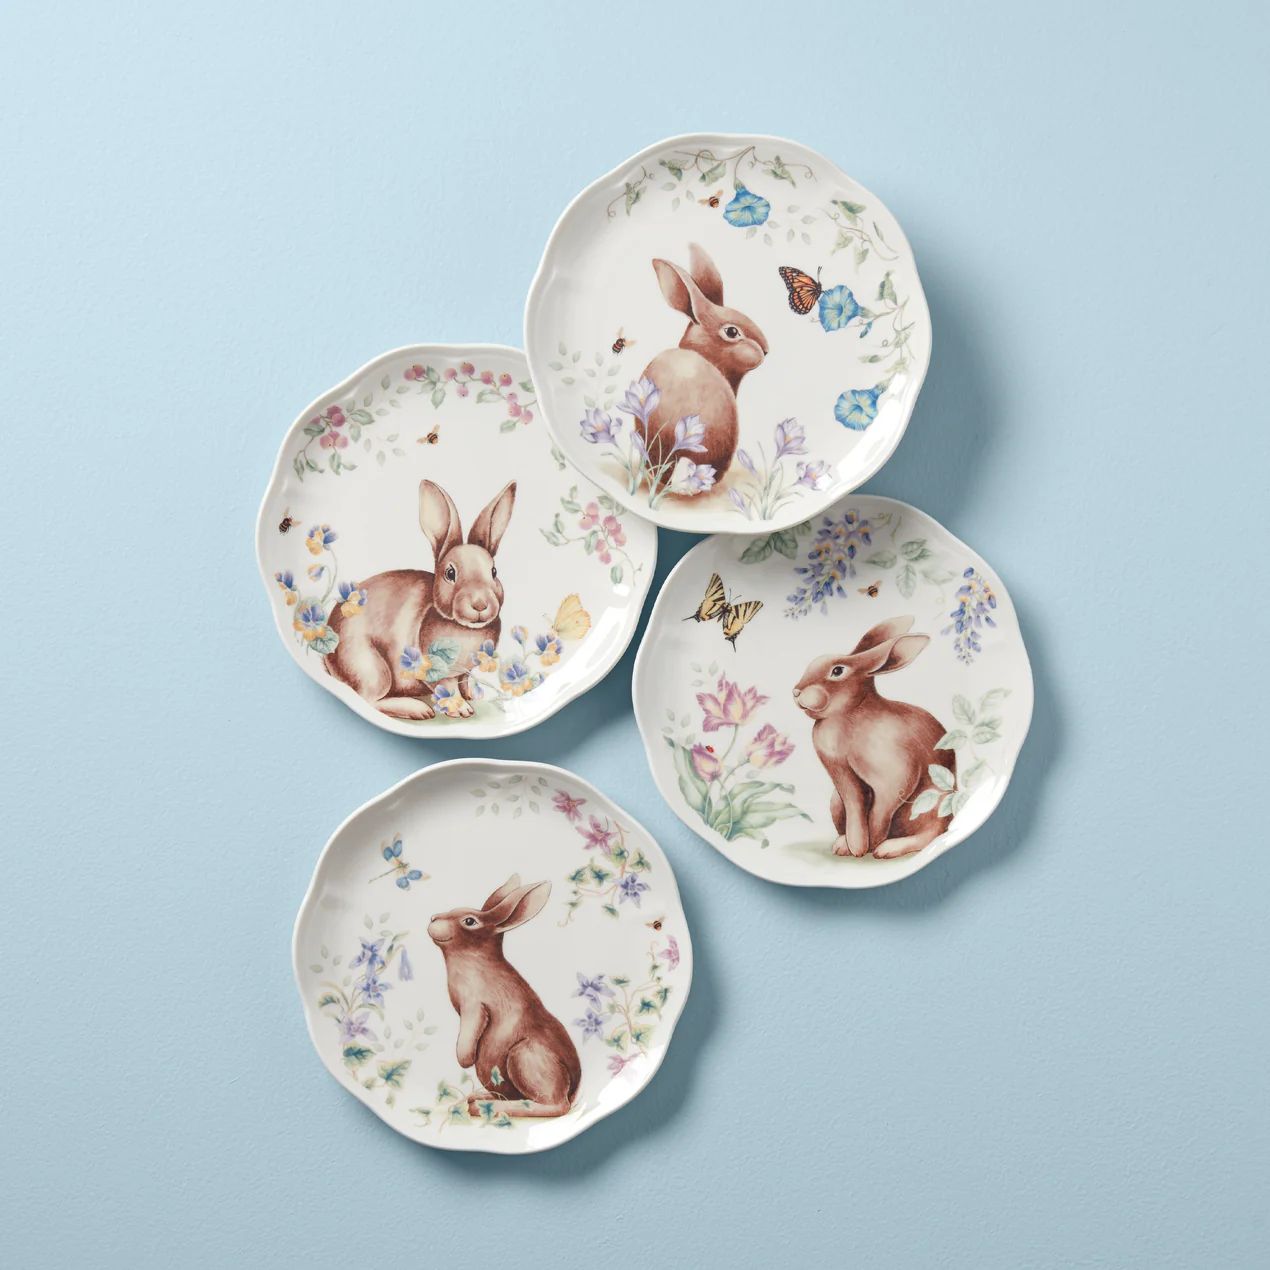 Butterfly Meadow Bunny 4-Piece Accent Plate Set | Lenox